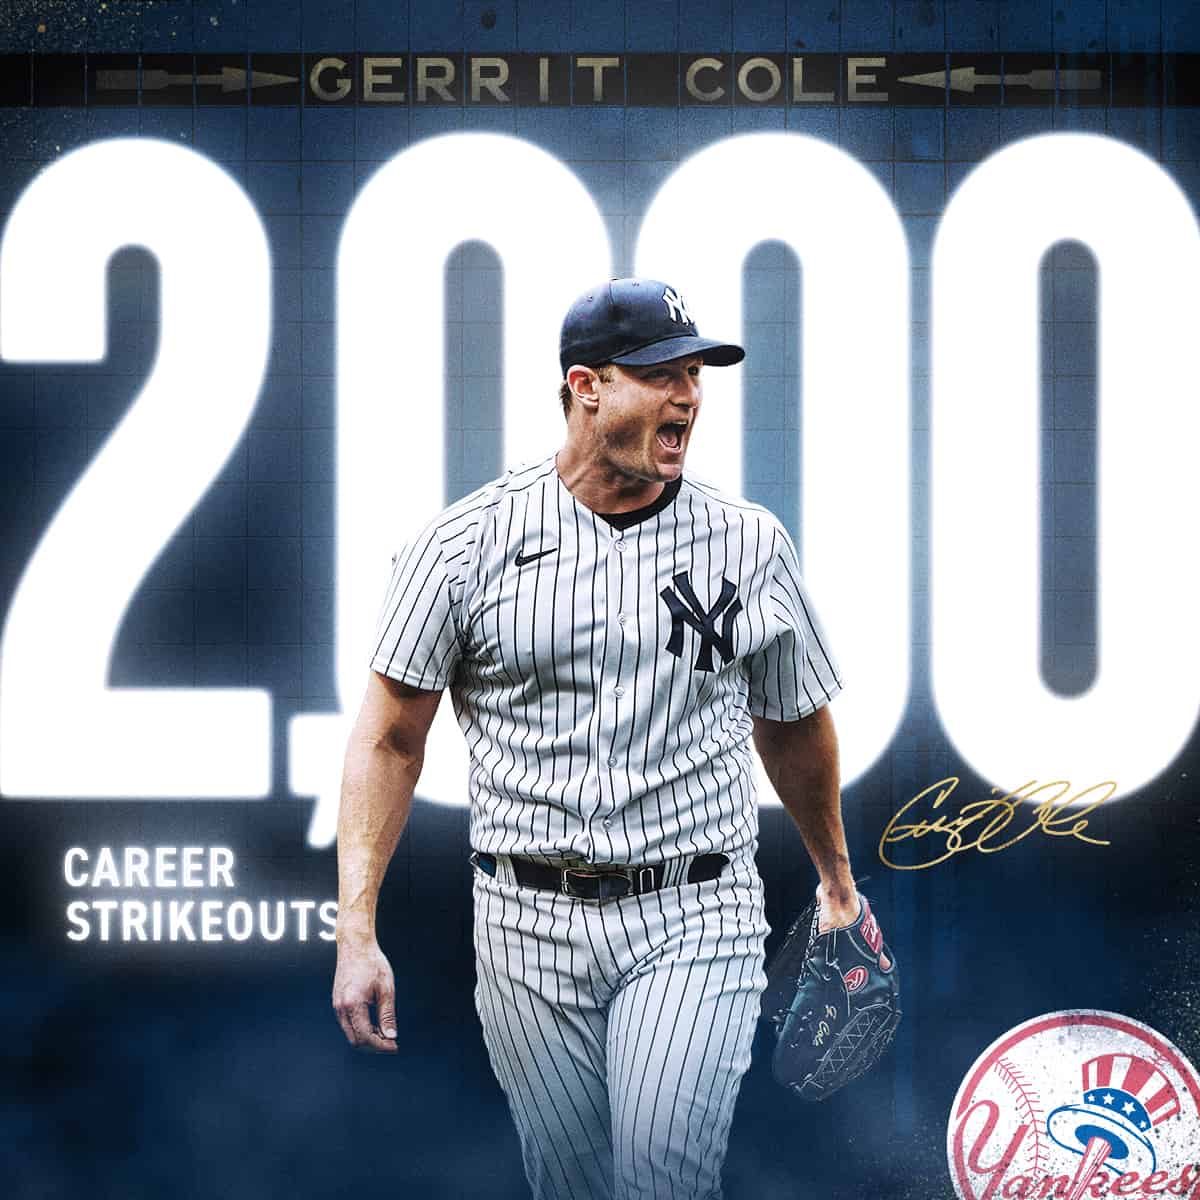 Gerrit Cole Reaches 2,000 Strikeouts, 3rd All-time Pitcher